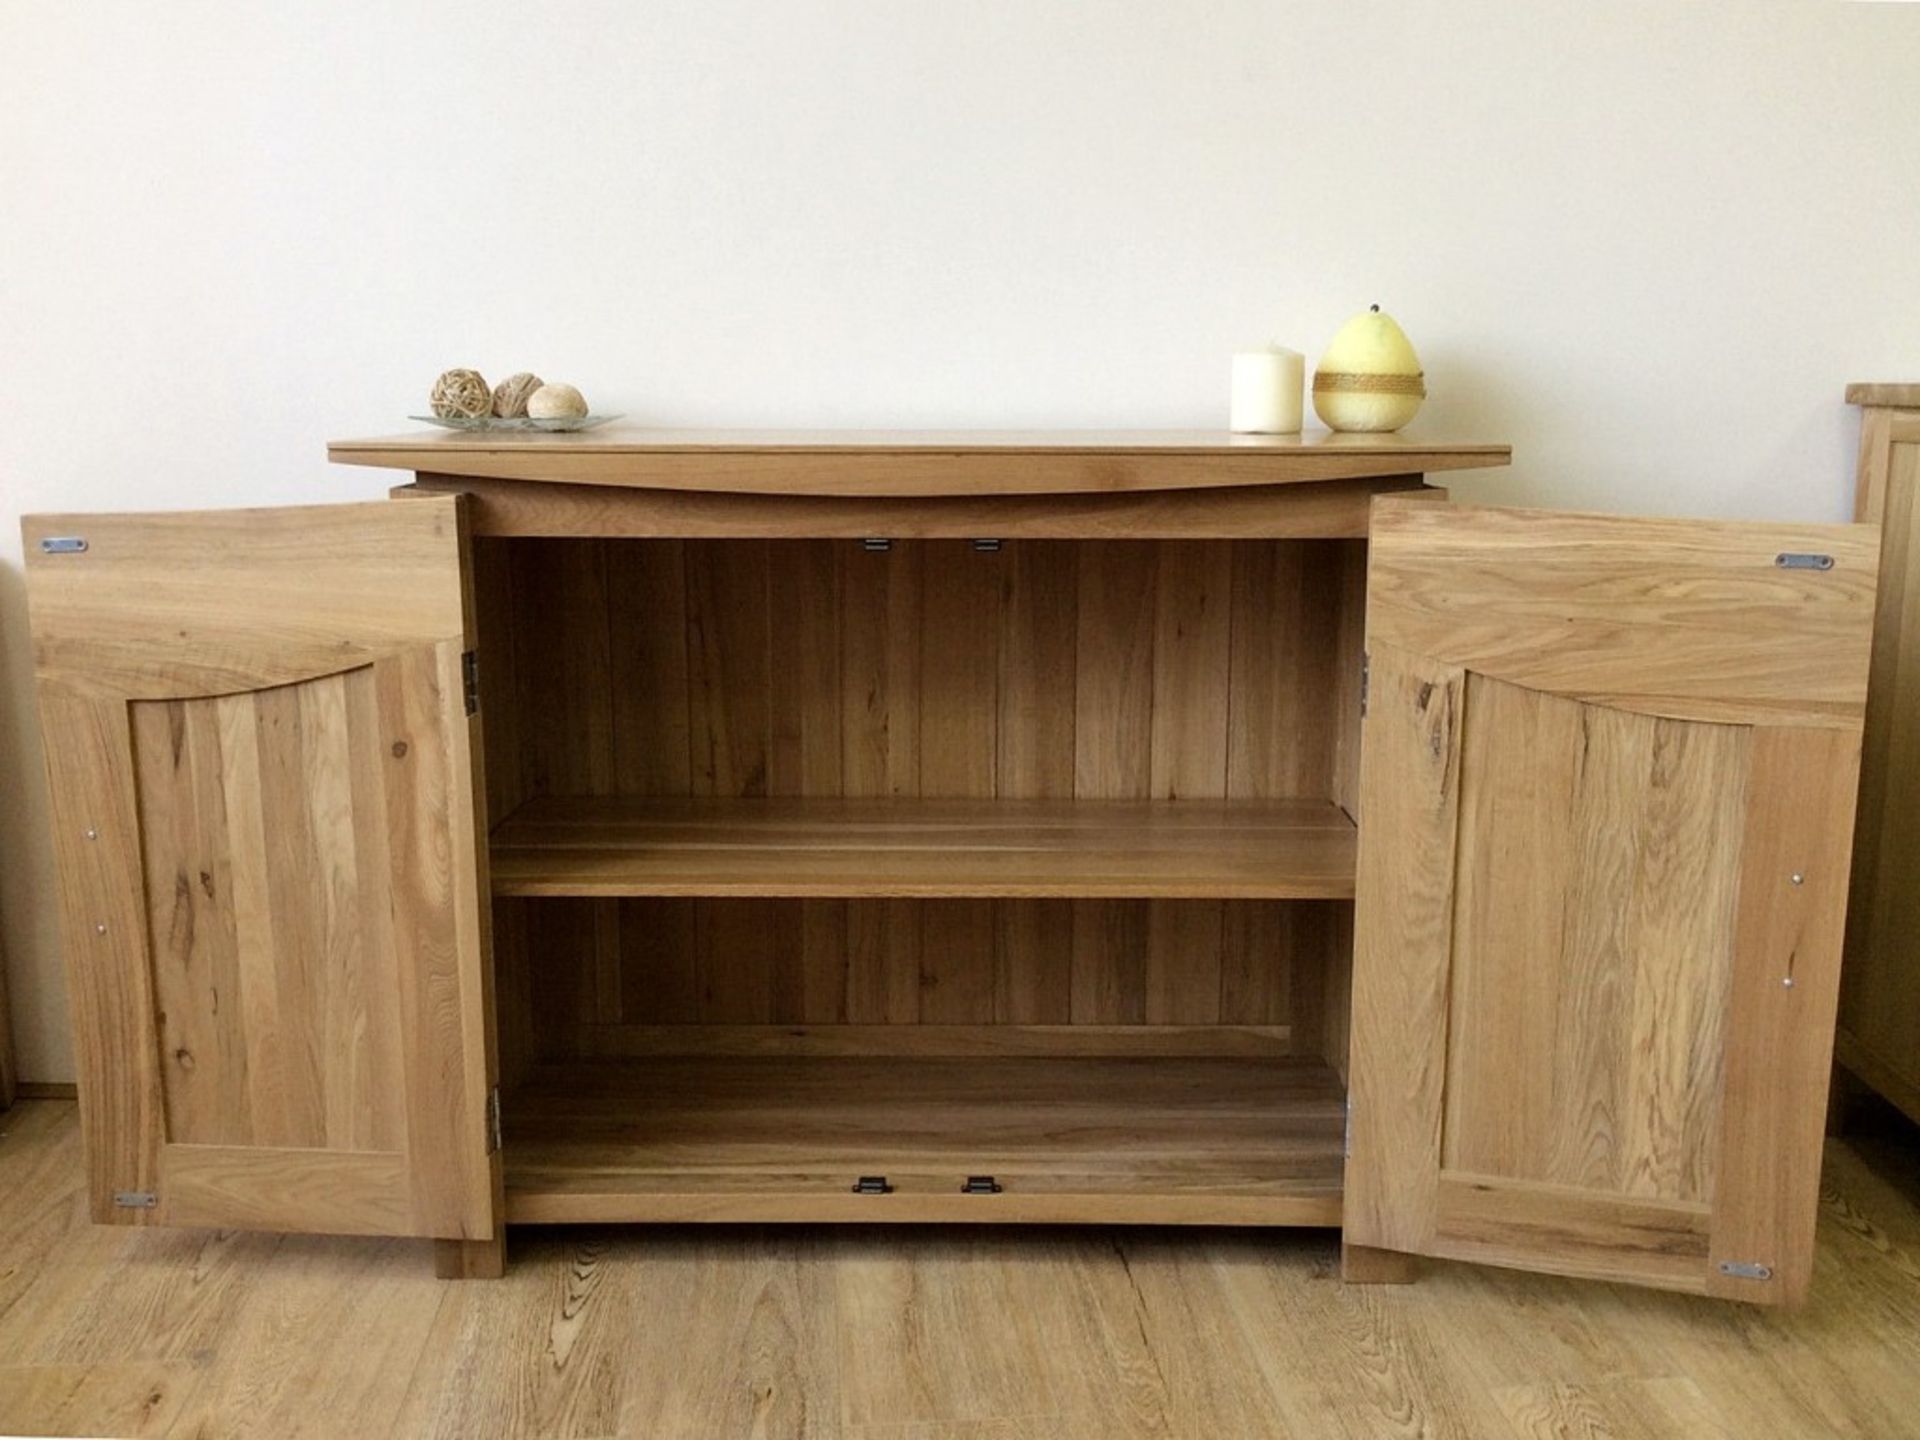 1 x Matlock Solid Oak 2 Door Sideboard - MADE FROM 100% SOLID OAK - CL112 - New, Ready Built & Boxed - Image 2 of 2